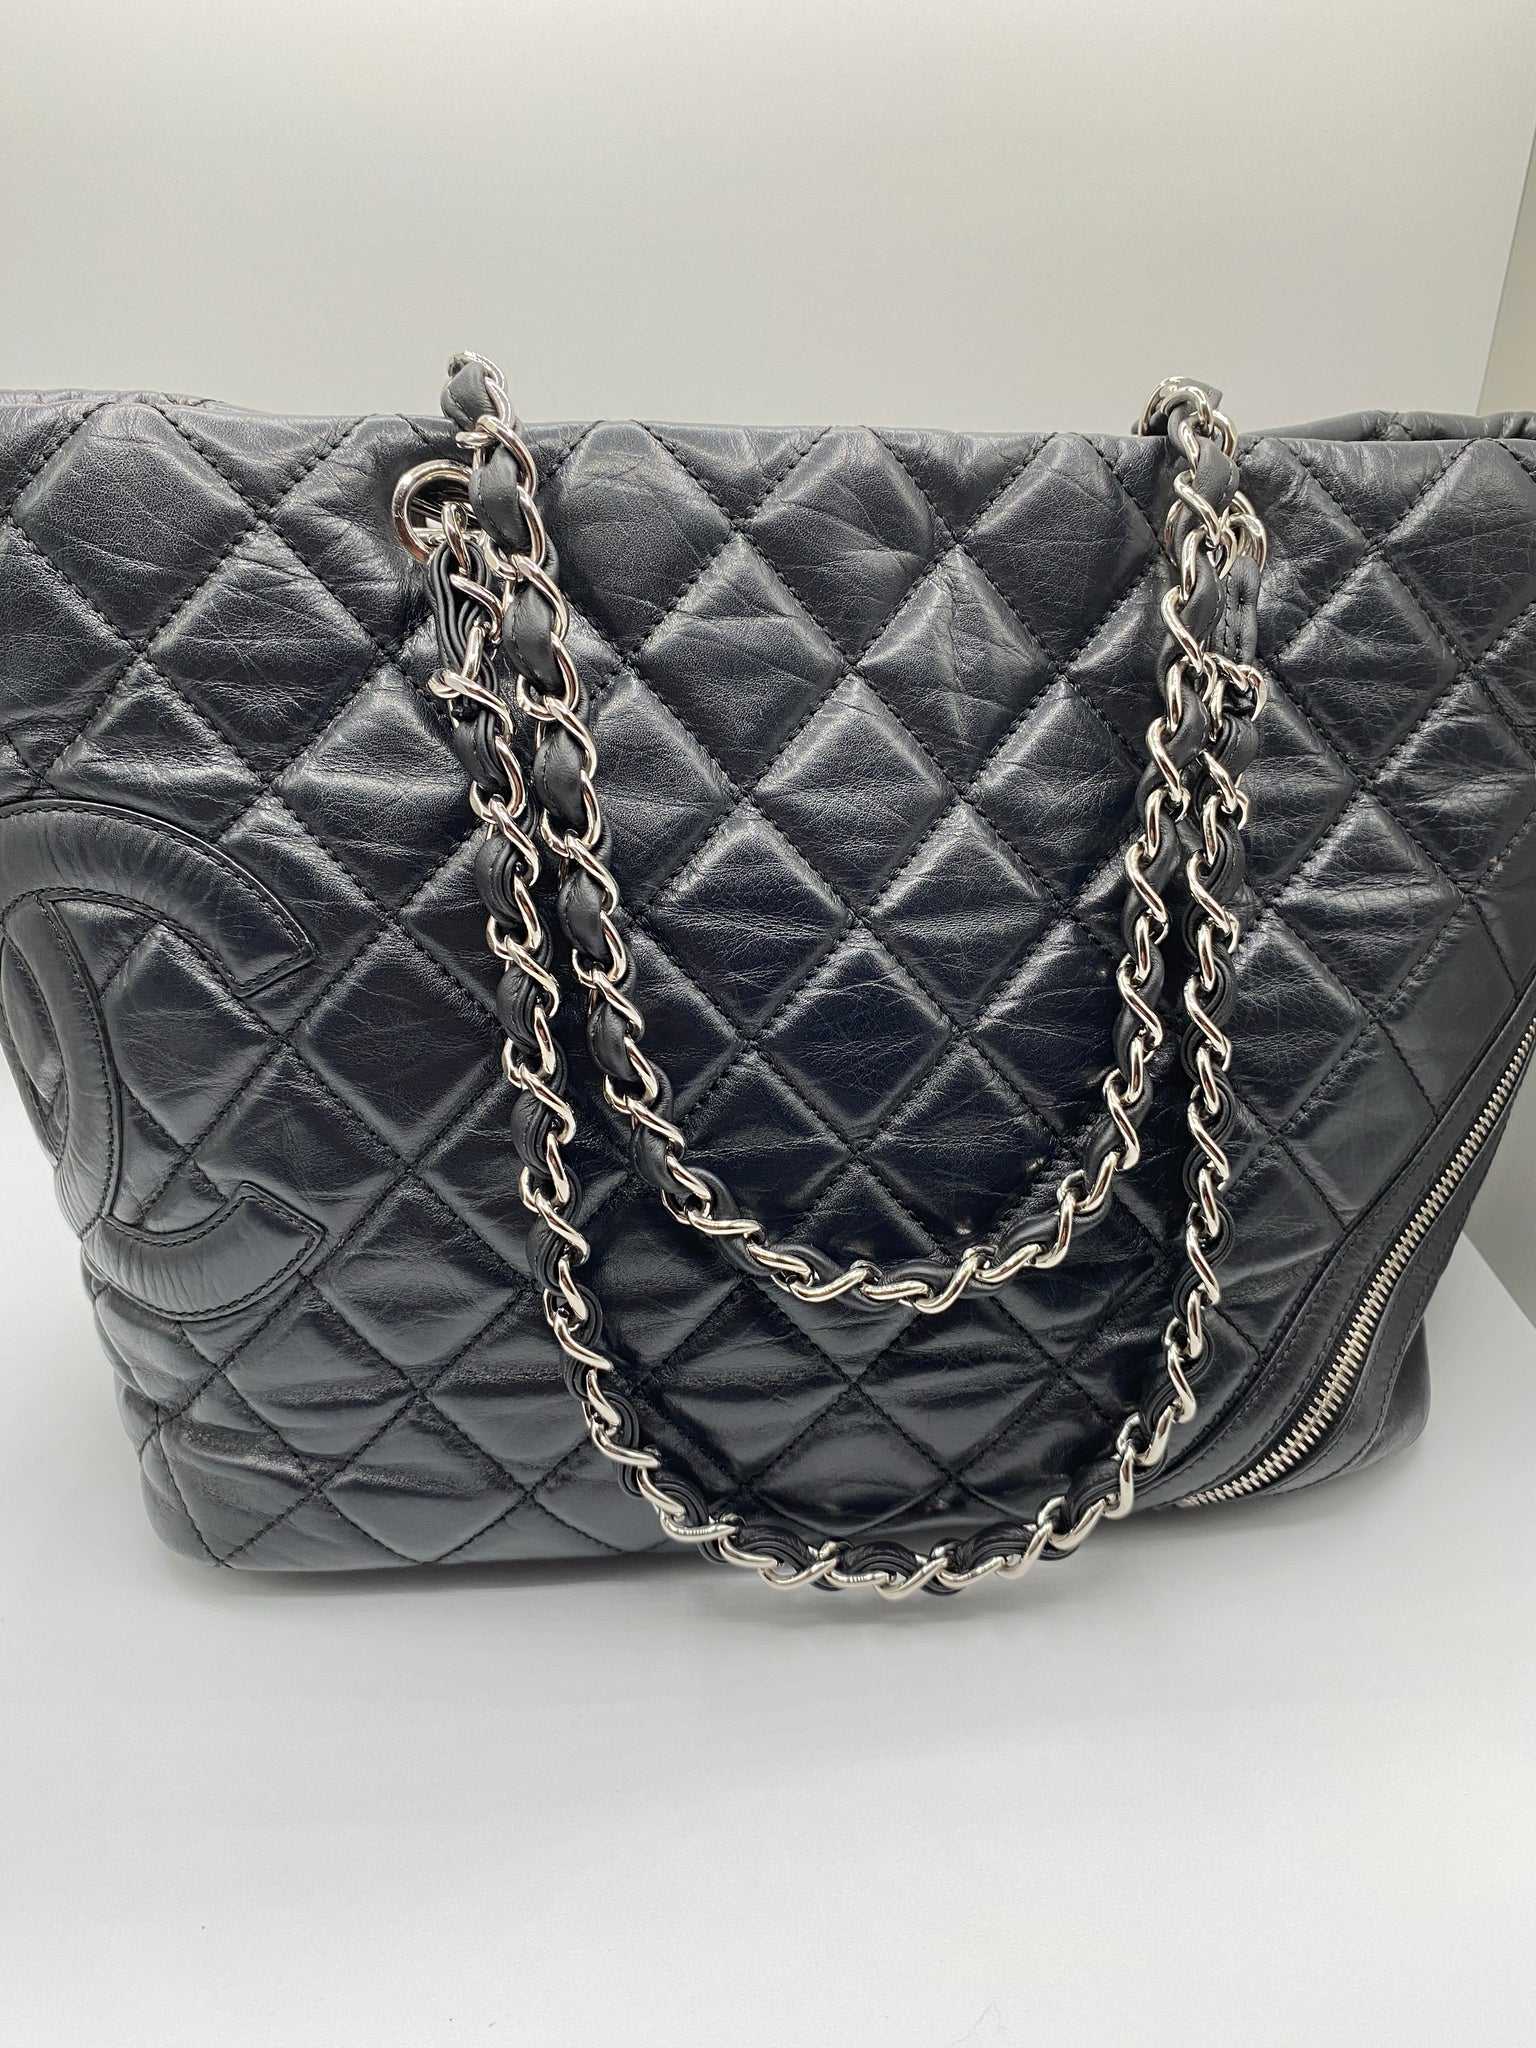 CHANEL Aged Calfskin Quilted Large Cotton Club Tote Black 866953